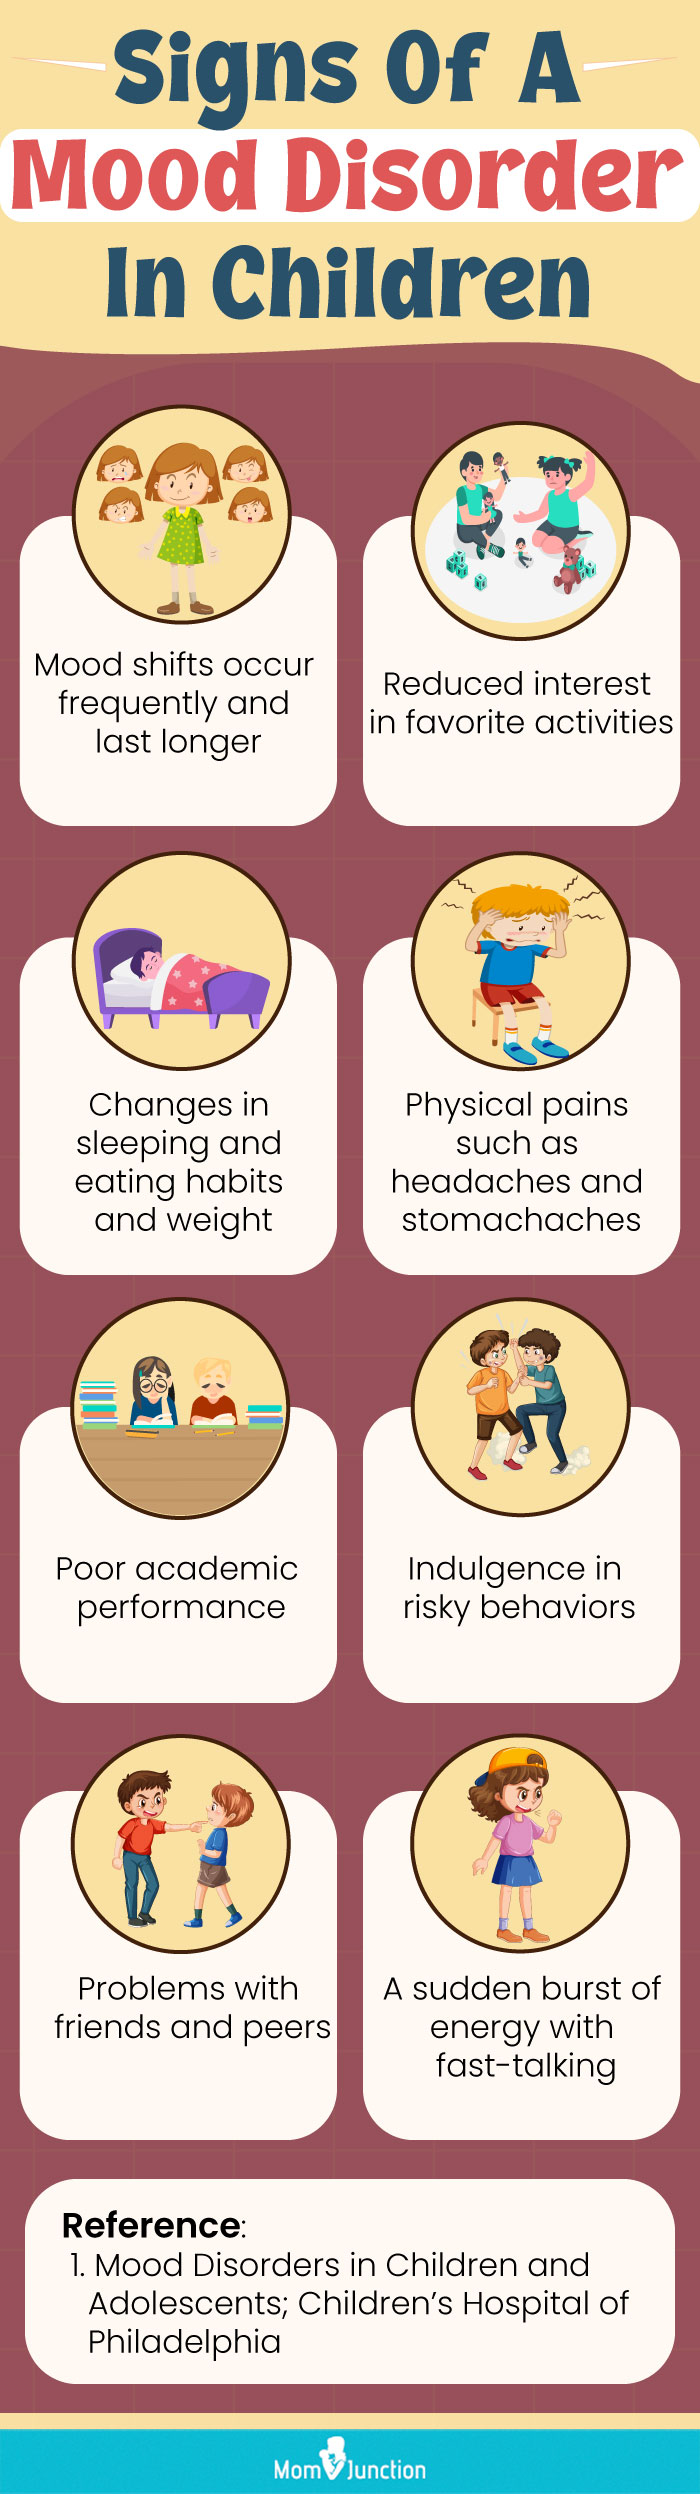 signs of a mood disorder in children (infographic)